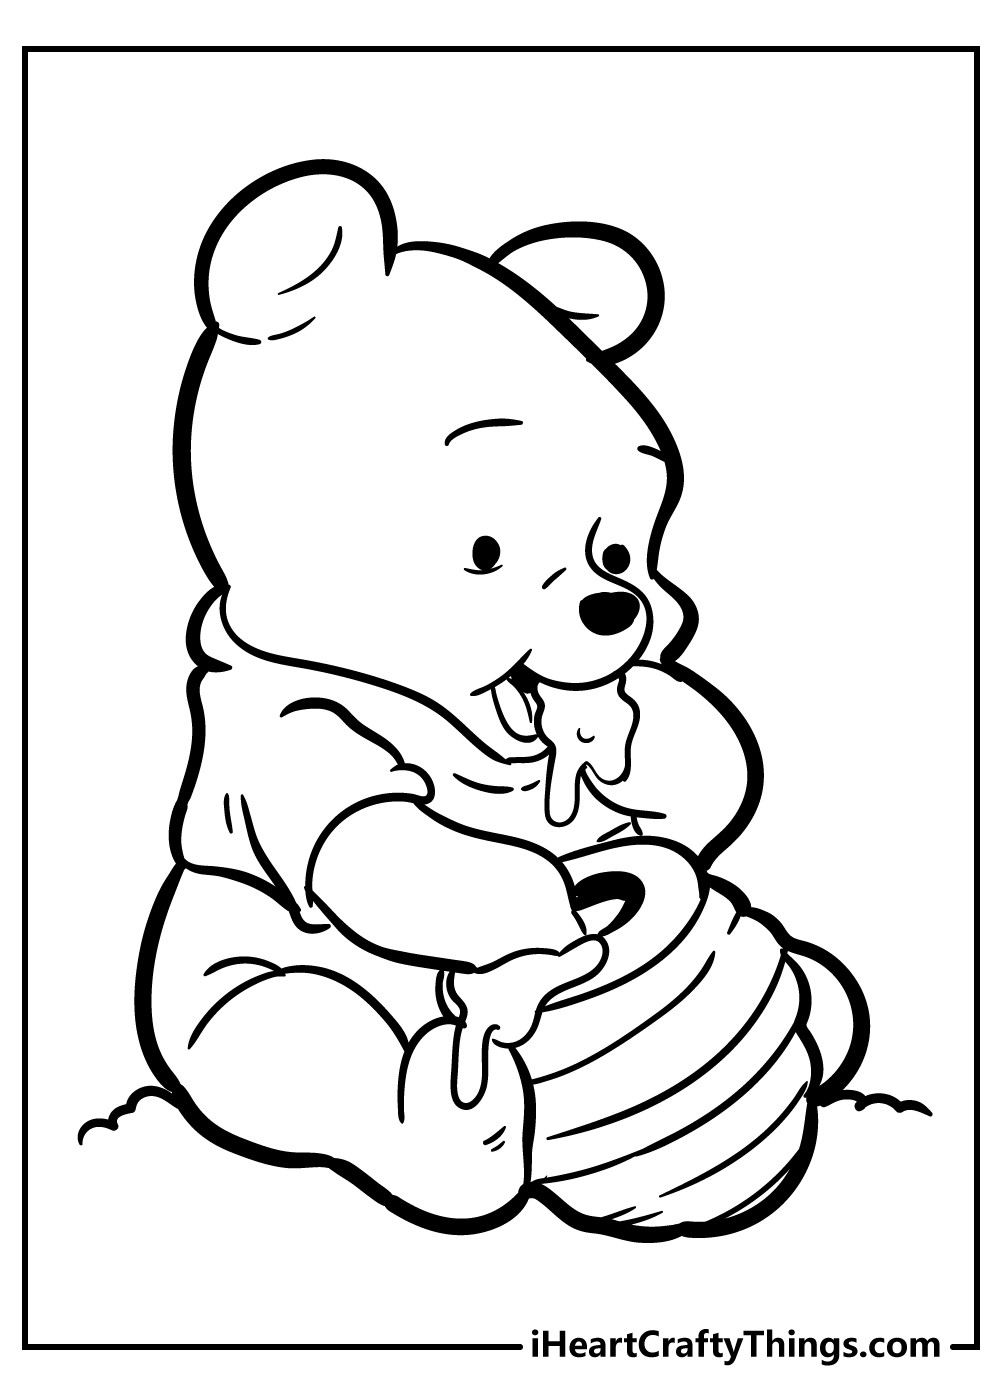 Winnie The Pooh Coloring Pages Updated 20